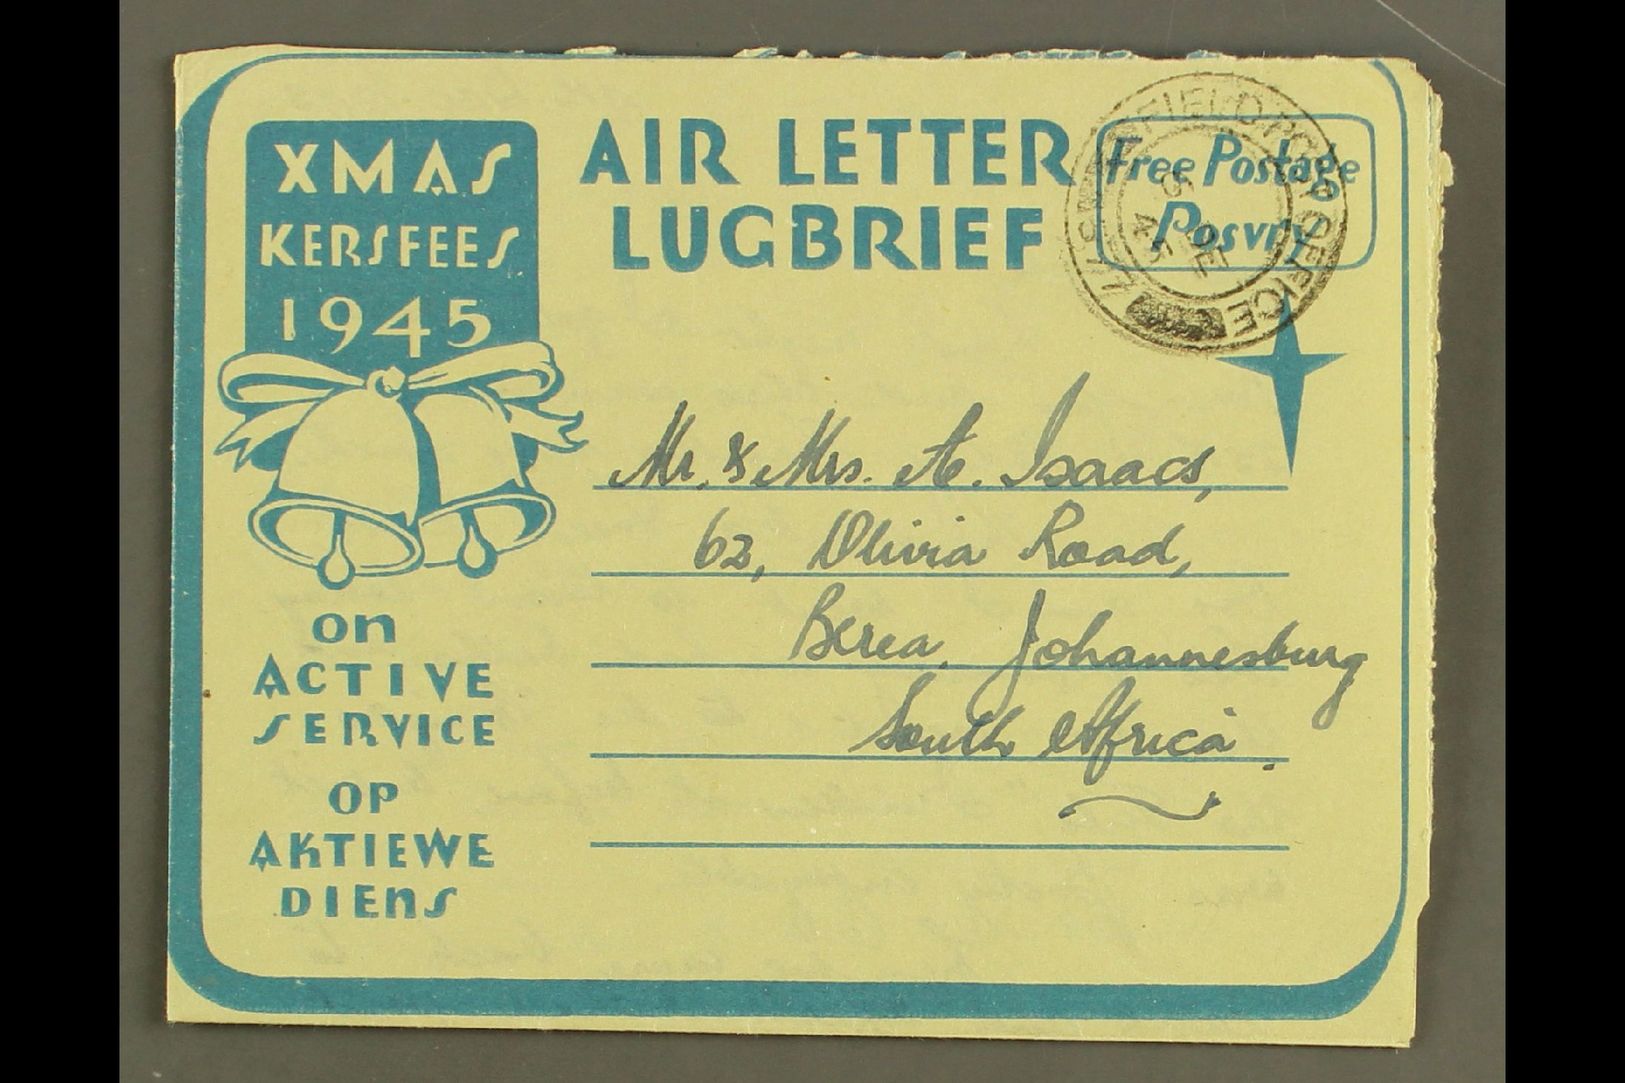 7787 AEROGRAMME 1945 "Greetings From The North" Christmas Air Letter, Inscribed "Free Postage" For Serving Troops, 1979 - Unclassified